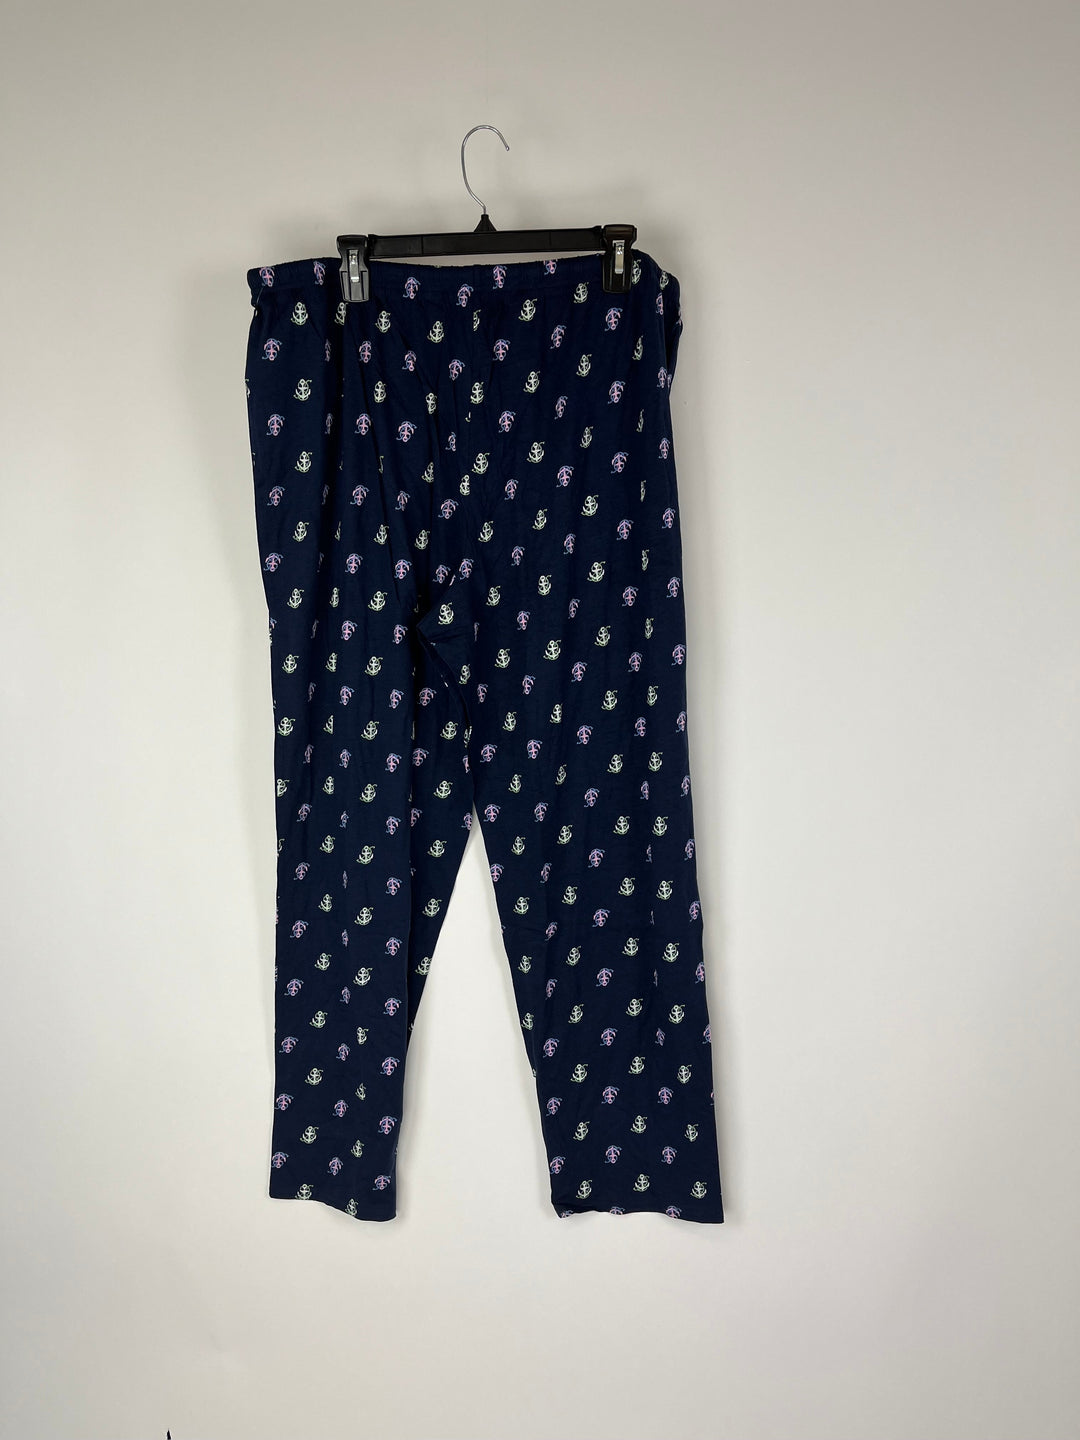 Navy Blue Anchor Pattern Pajama Set - Small and 1X